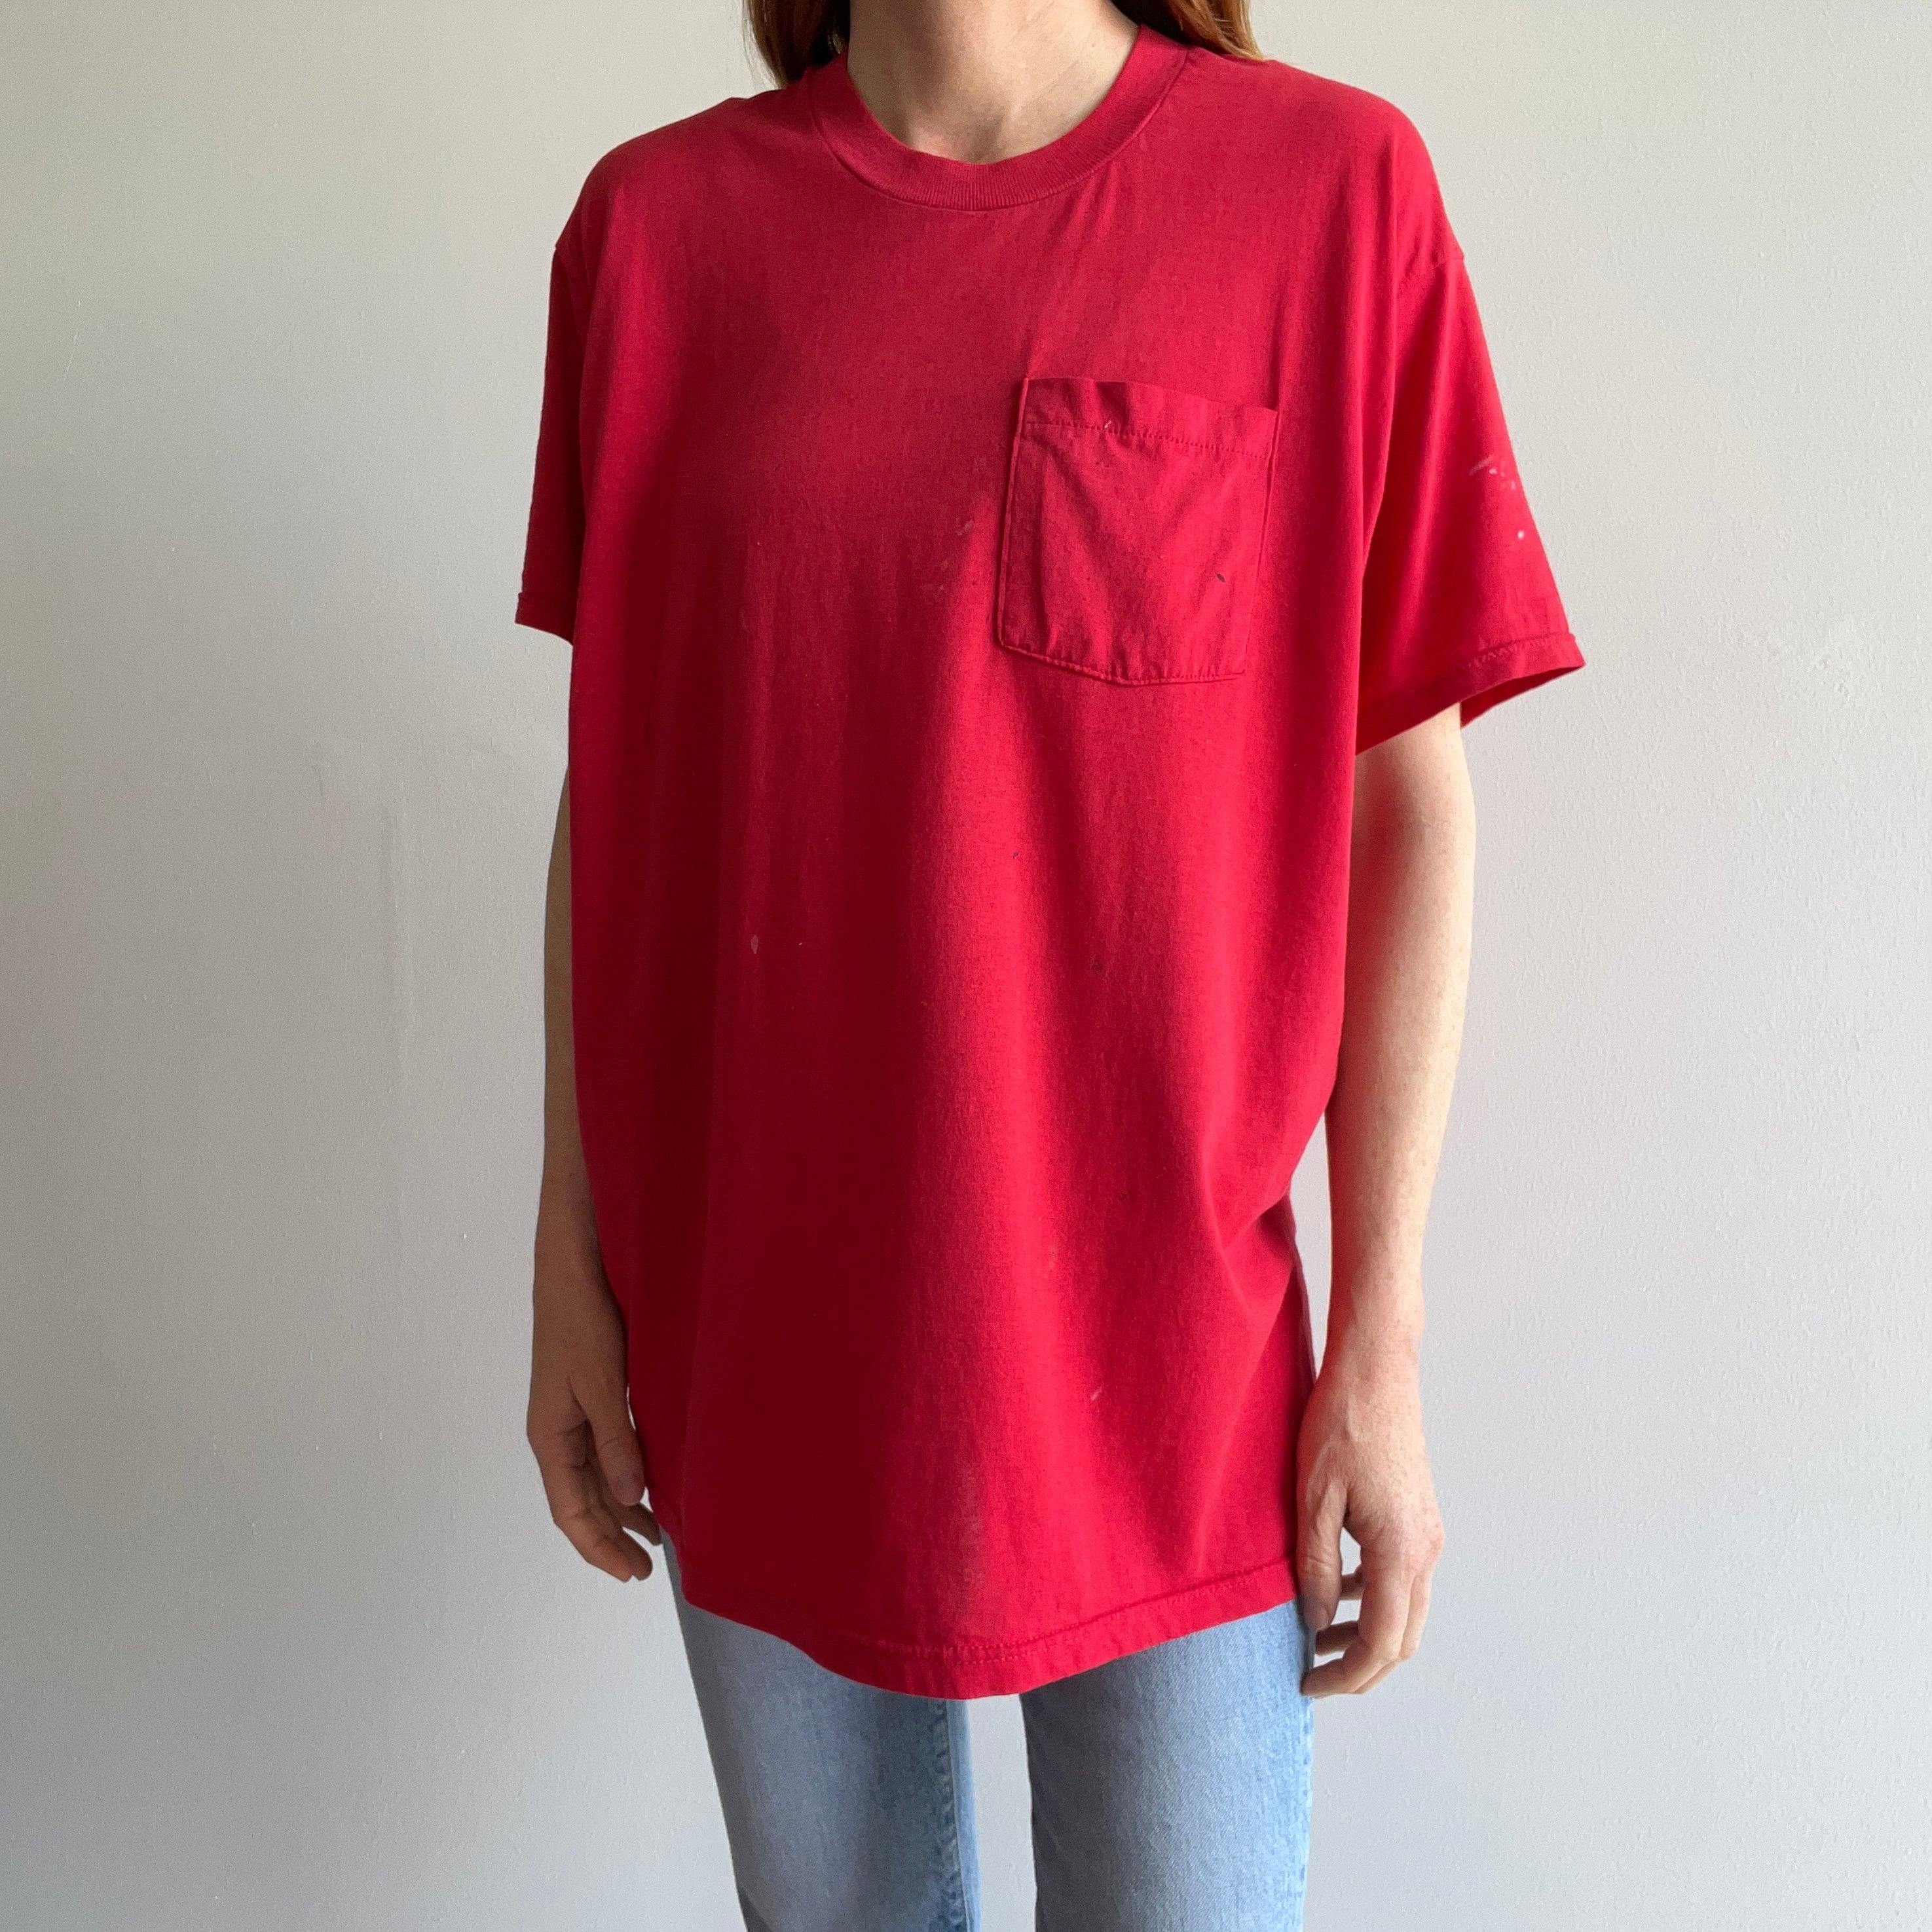 1980s Super Stained Thinned Out Slouchy and Faded Red Pocket T-Shirt